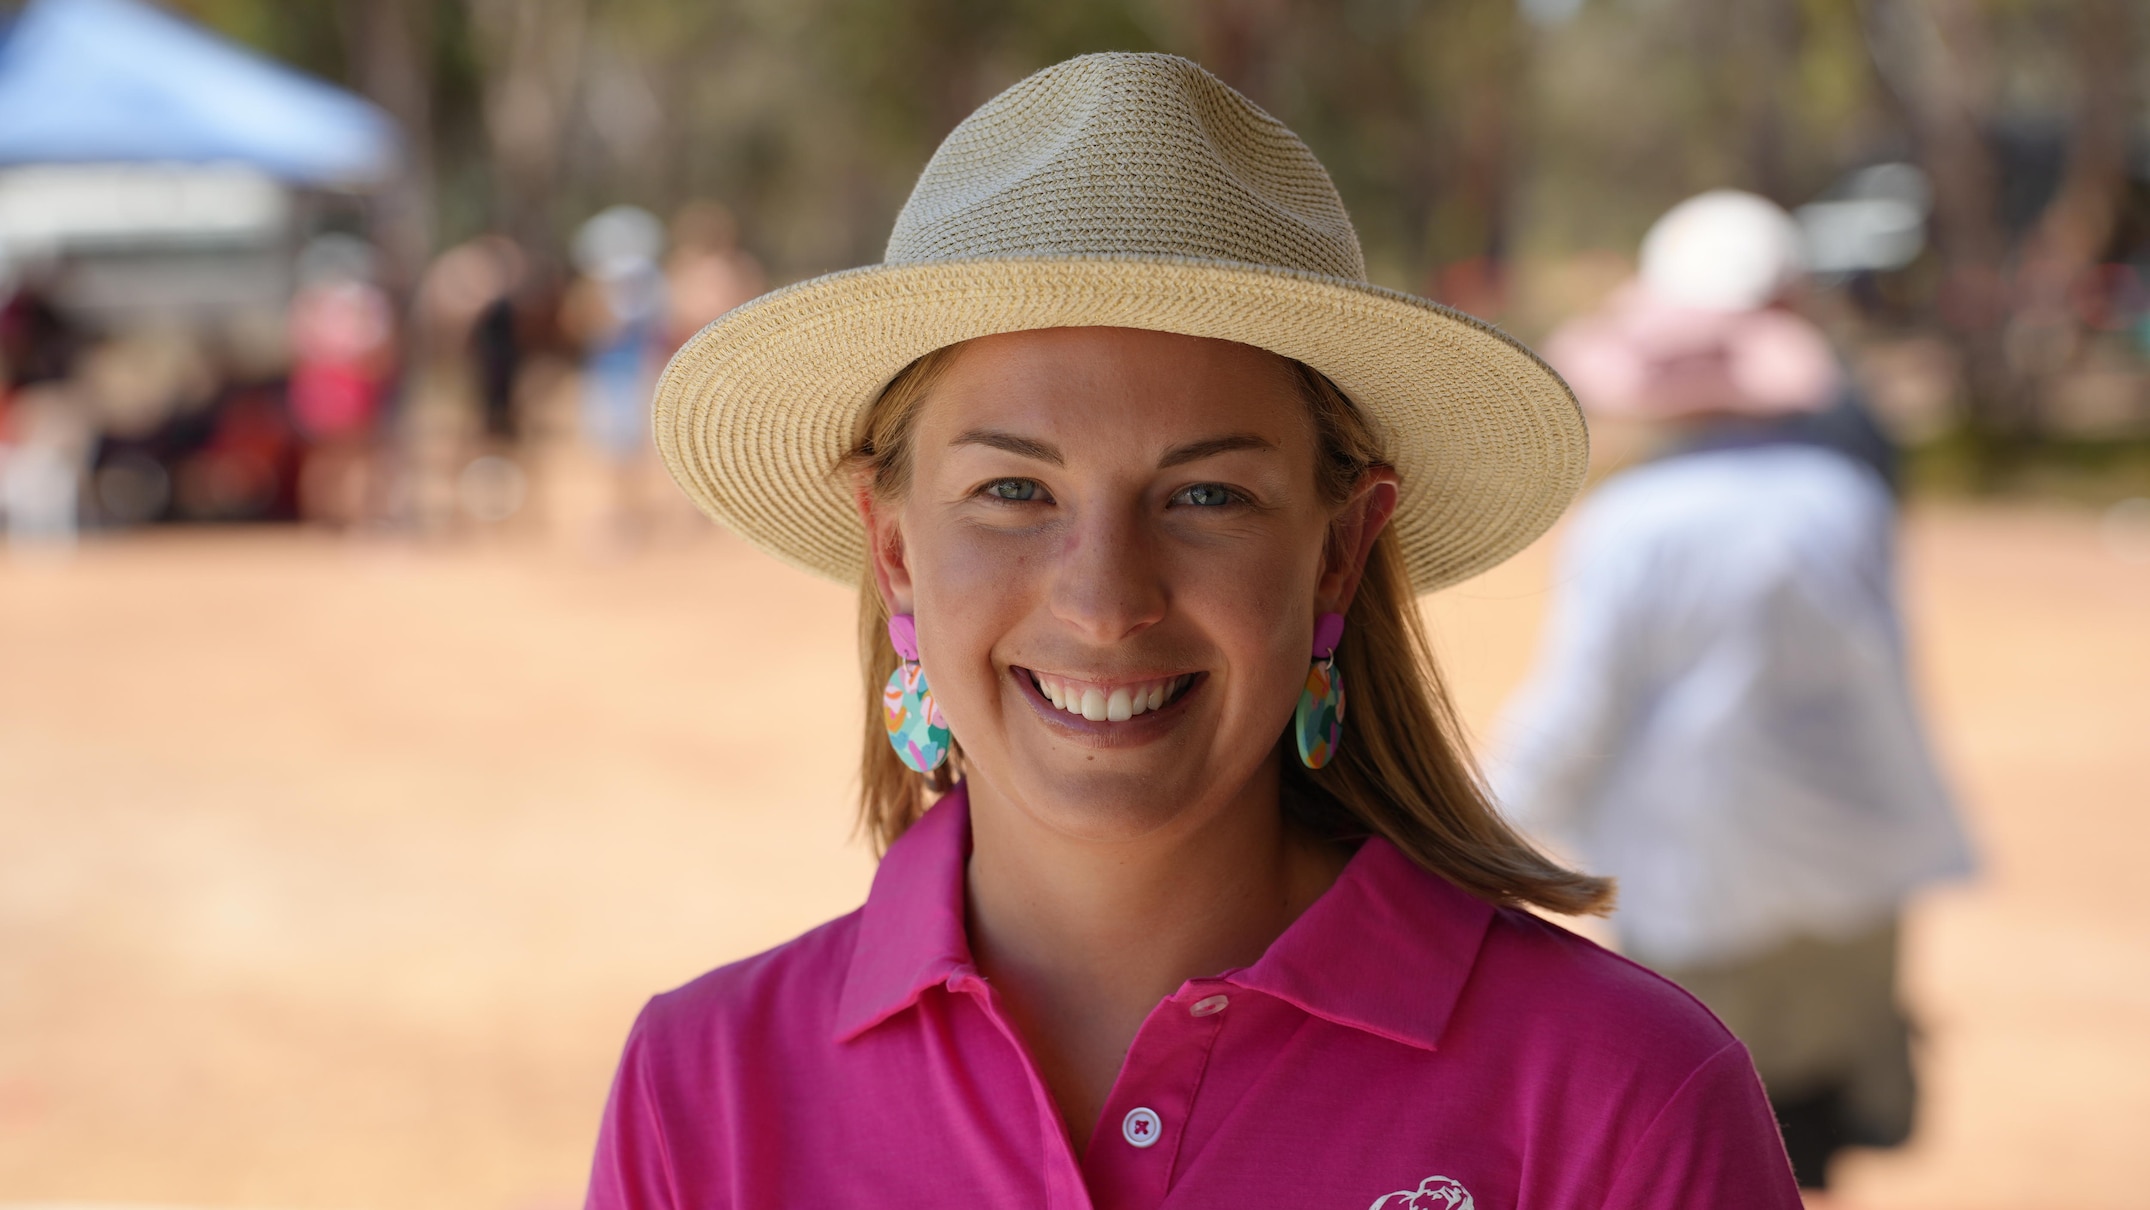 country women's association in wheatbelt town saved by young community citizen of the year